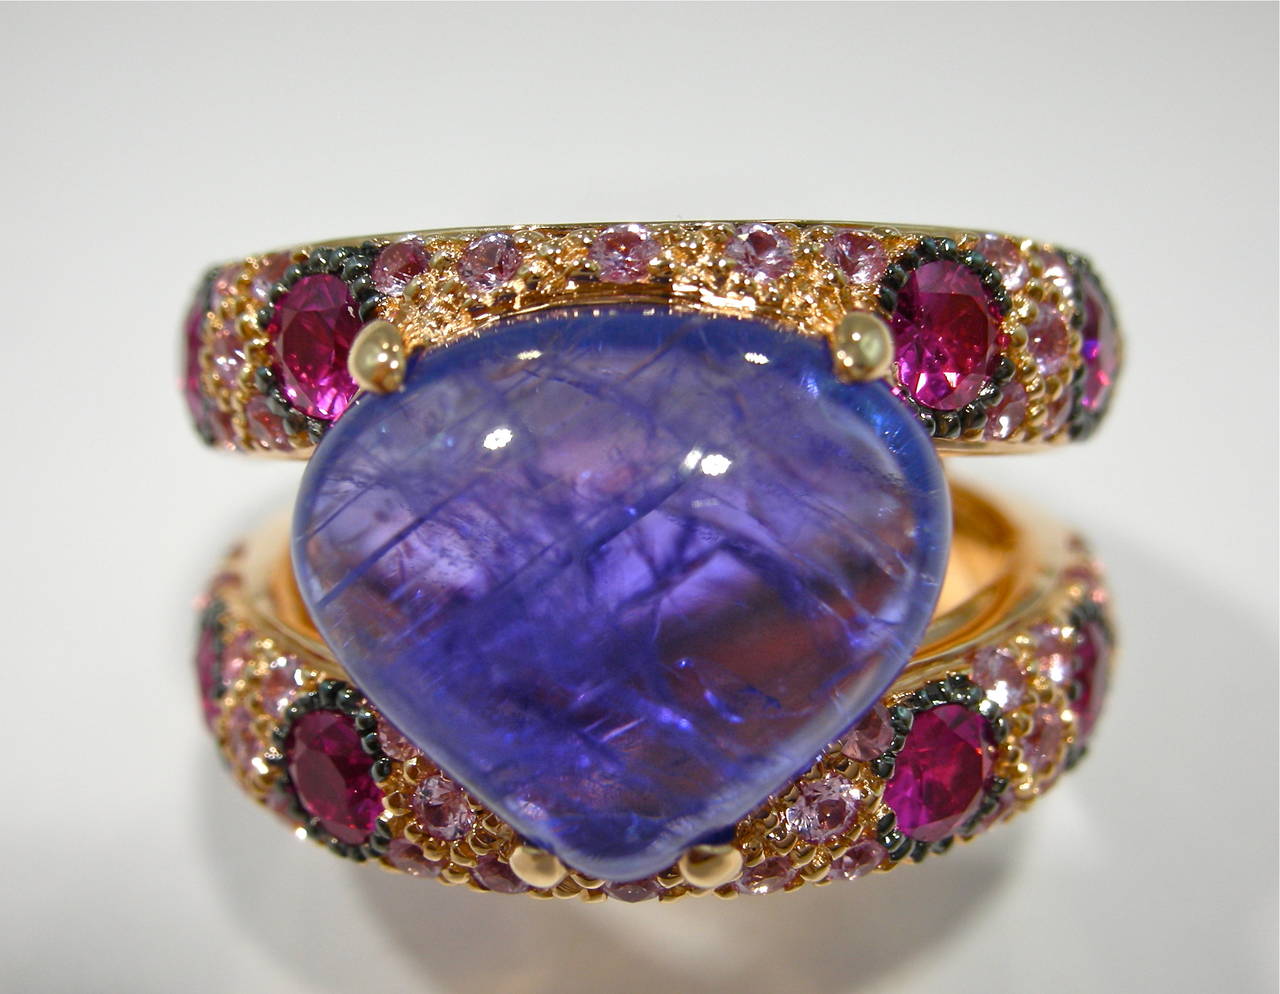 Jona design collection, a cabochon Tanzanite weighing 5.05 carats mounted on  a 18k rose gold ring with twelve rubies set inside a pink sapphire pavé. Designed and hand crafted in Italy (size 6.5 can be sized)